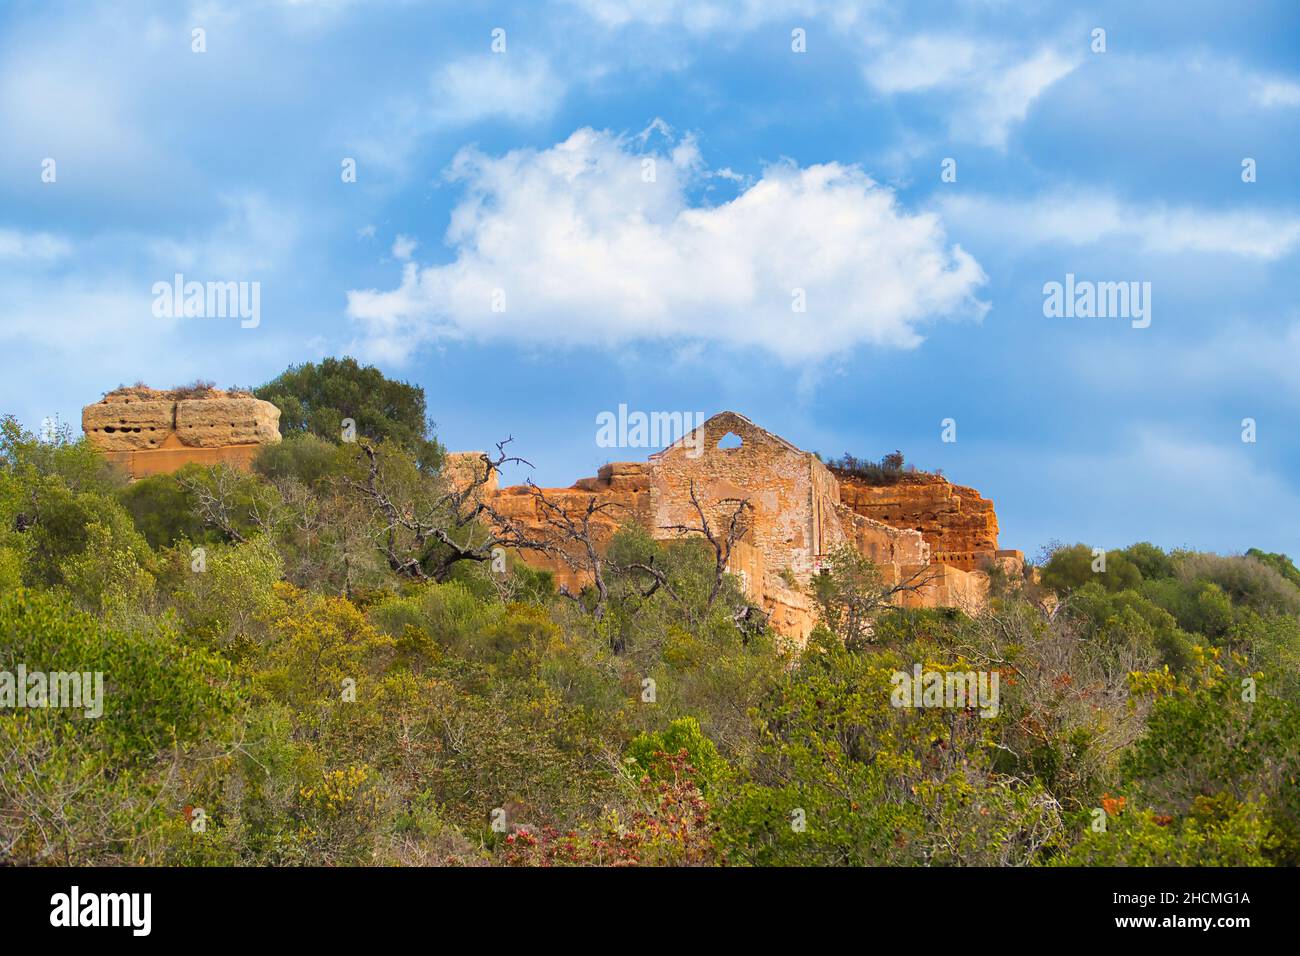 The ruins of the medieval Paderna Castle rise up from the dry Mediterranean scrubland. Albufeira, Algarve, Portugal Stock Photo